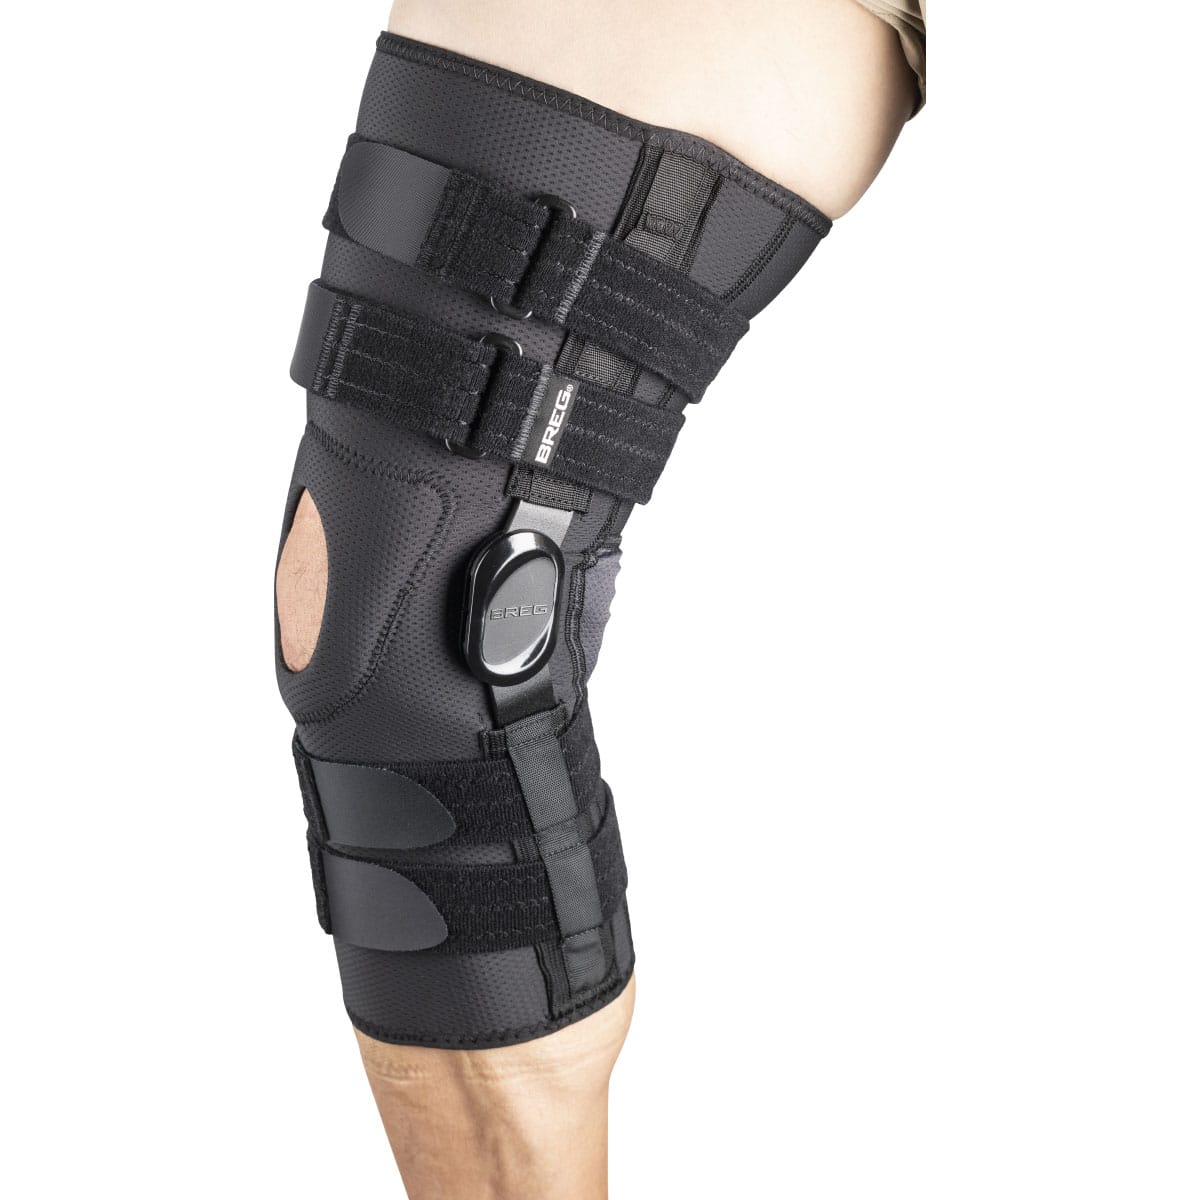 High Quality Angle Adjustable Knee Support Brace Orthosis For